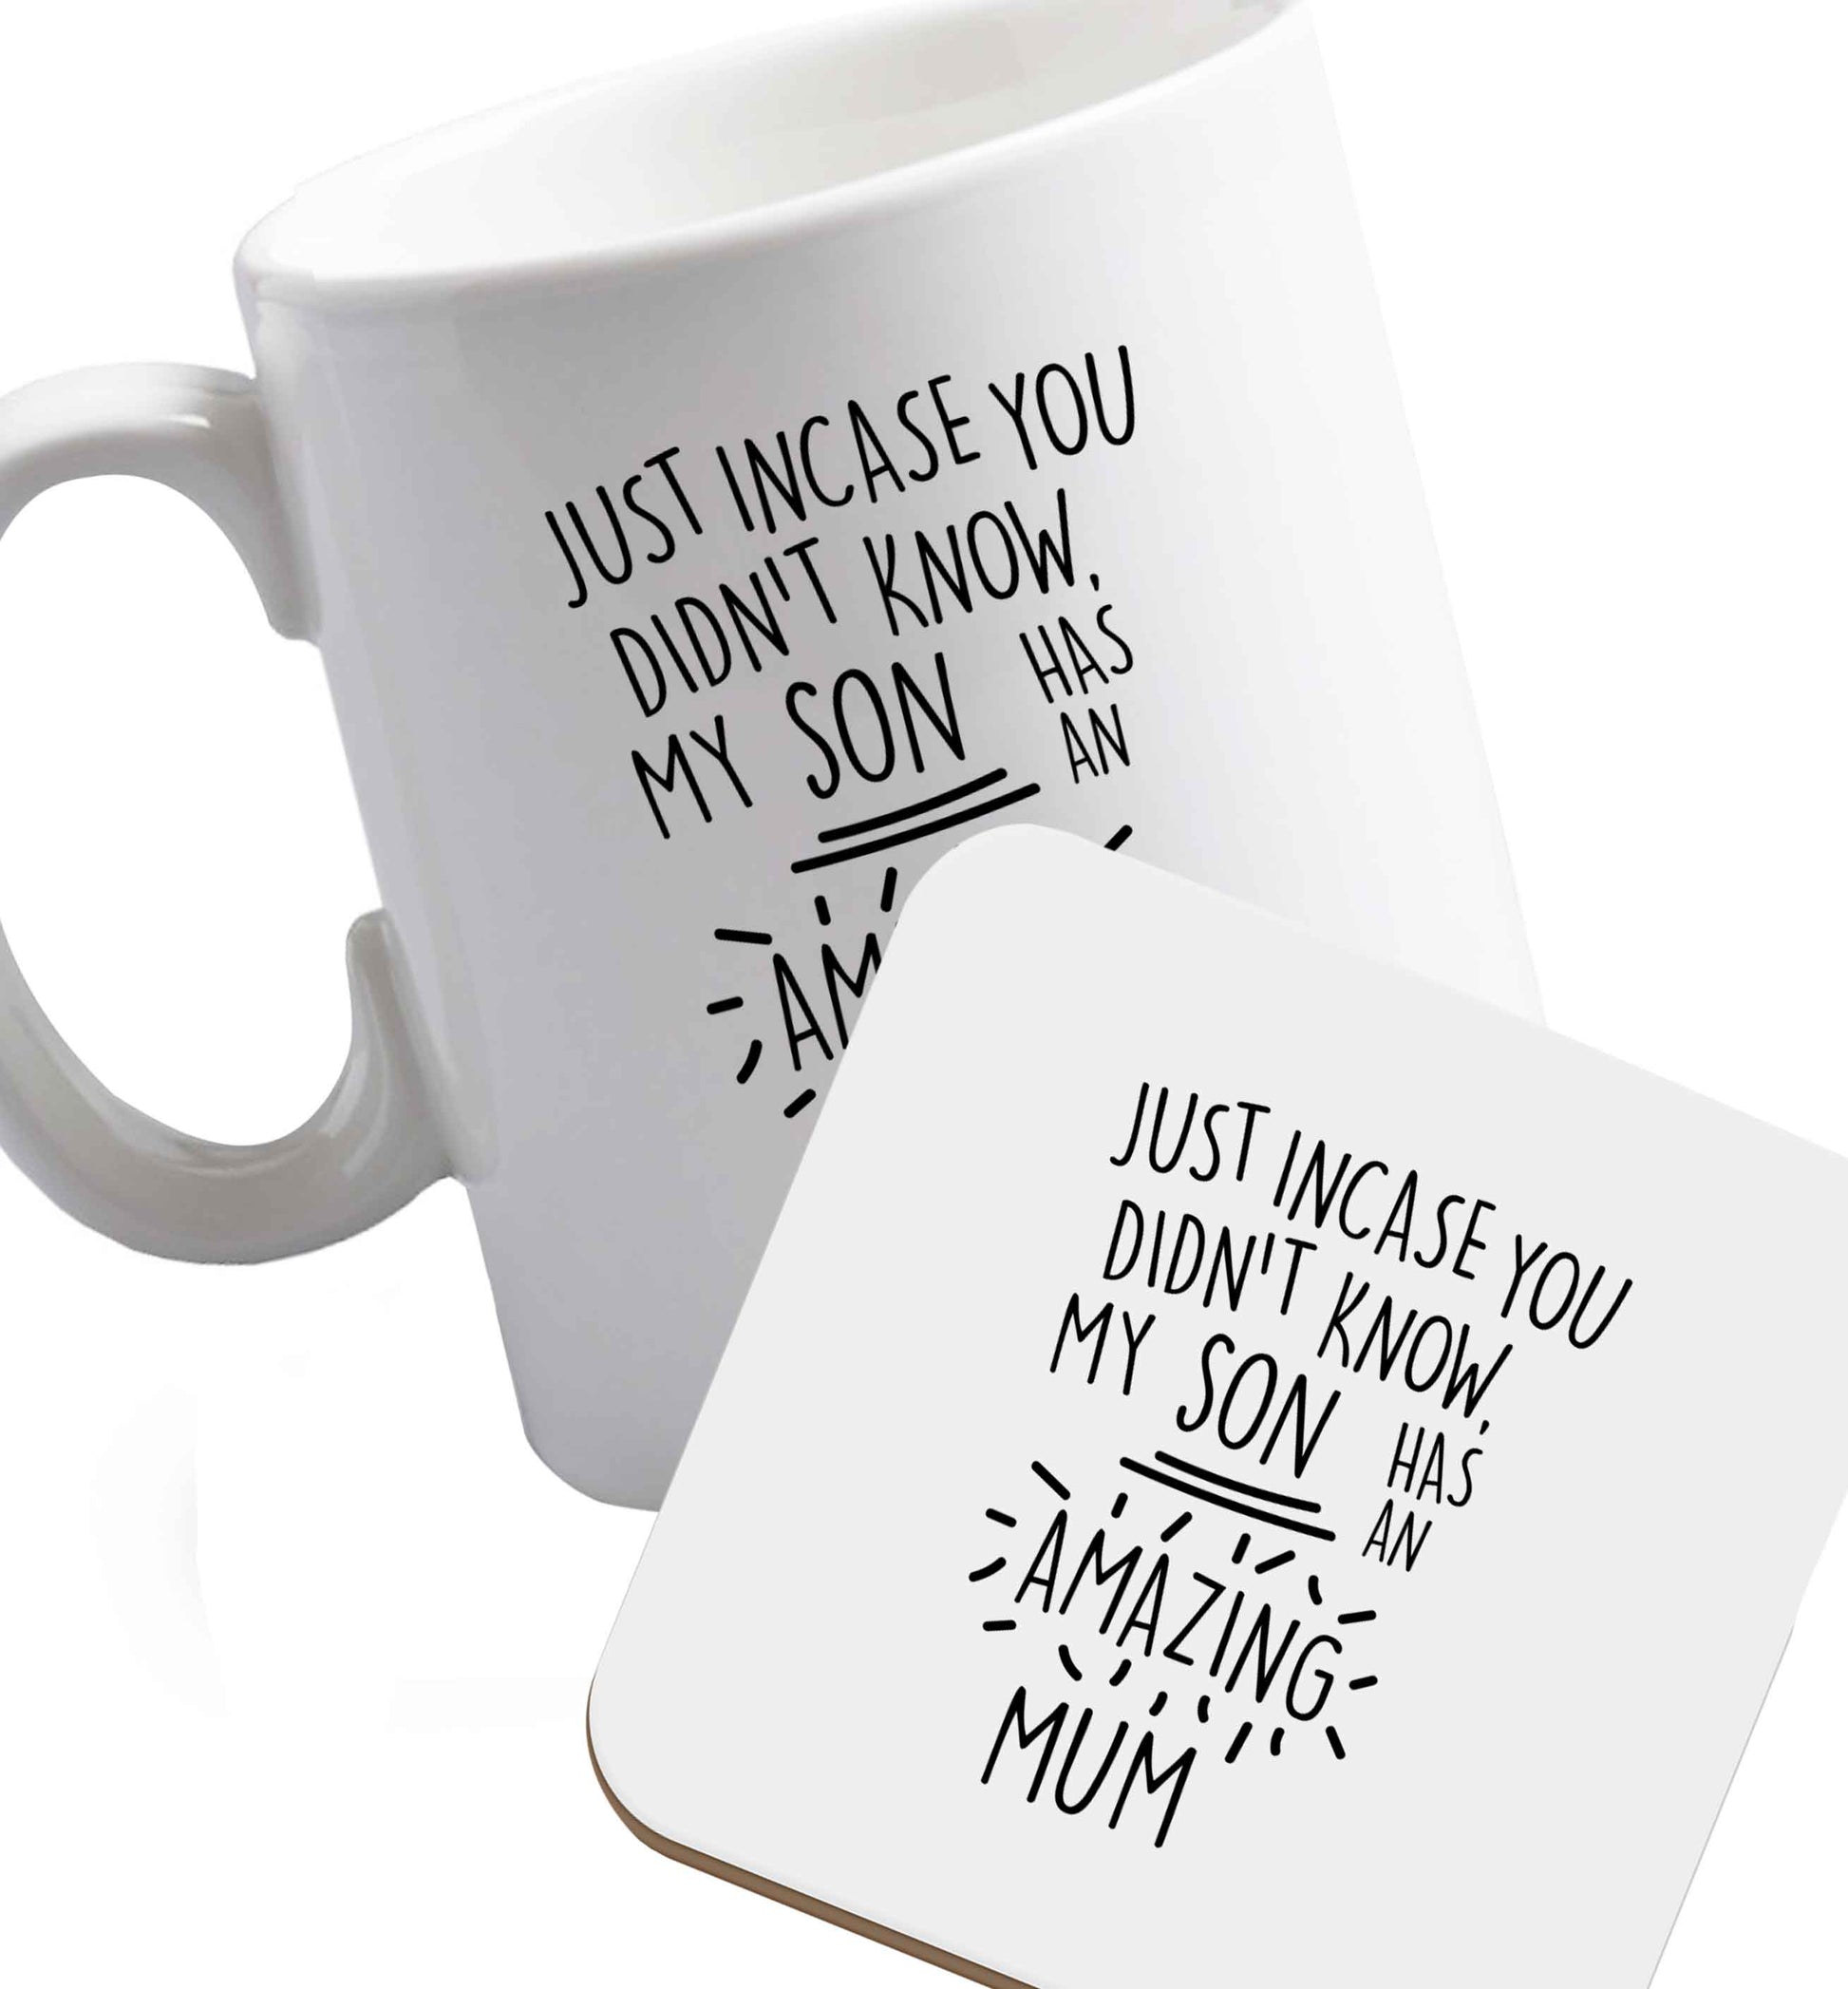 10 oz Just incase you didn't know my son has an amazing mum ceramic mug and coaster set right handed